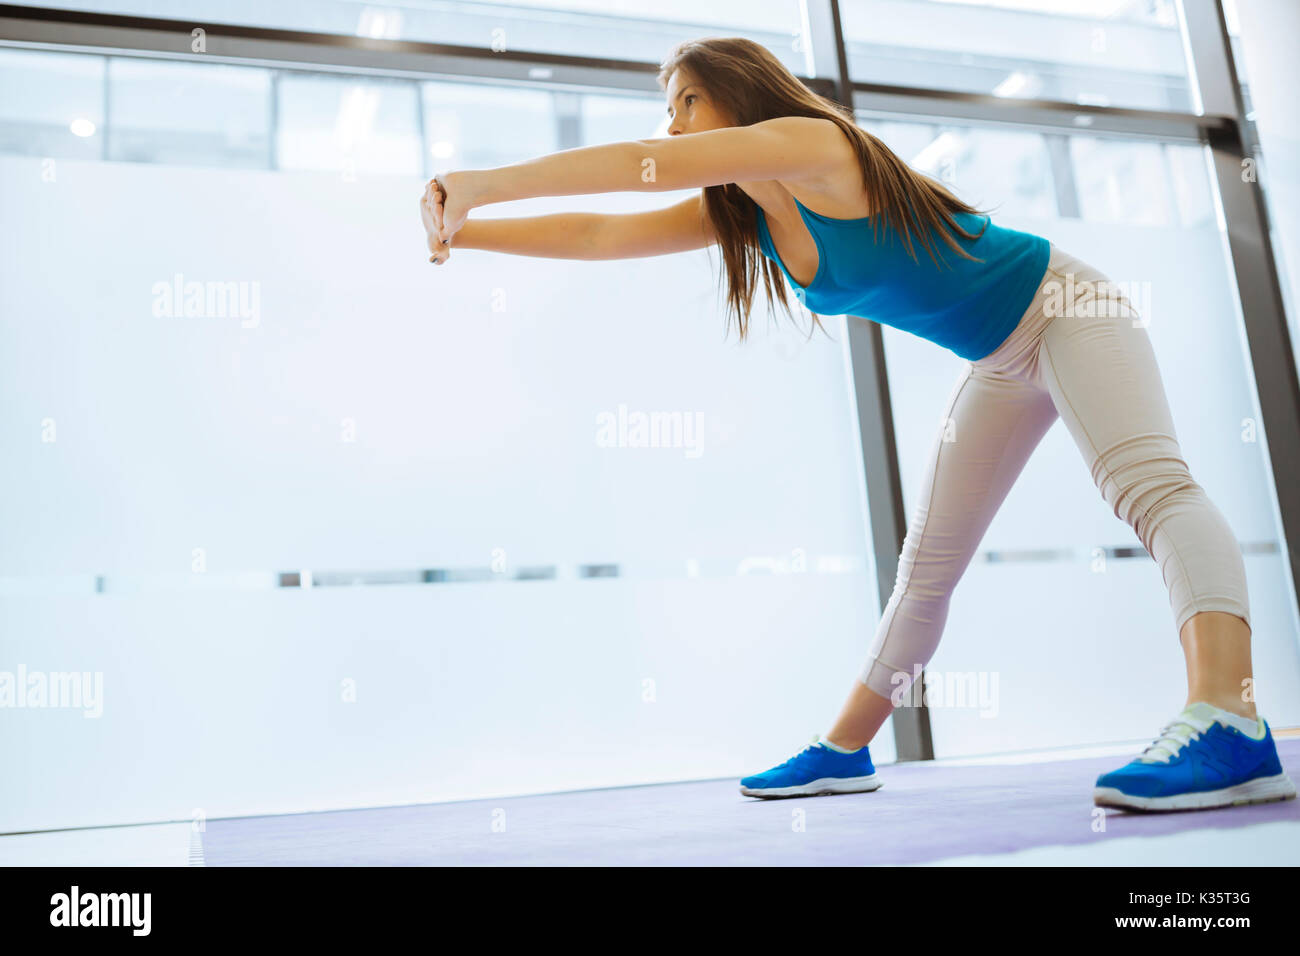 Beautiful woman stretching and exercising Stock Photo